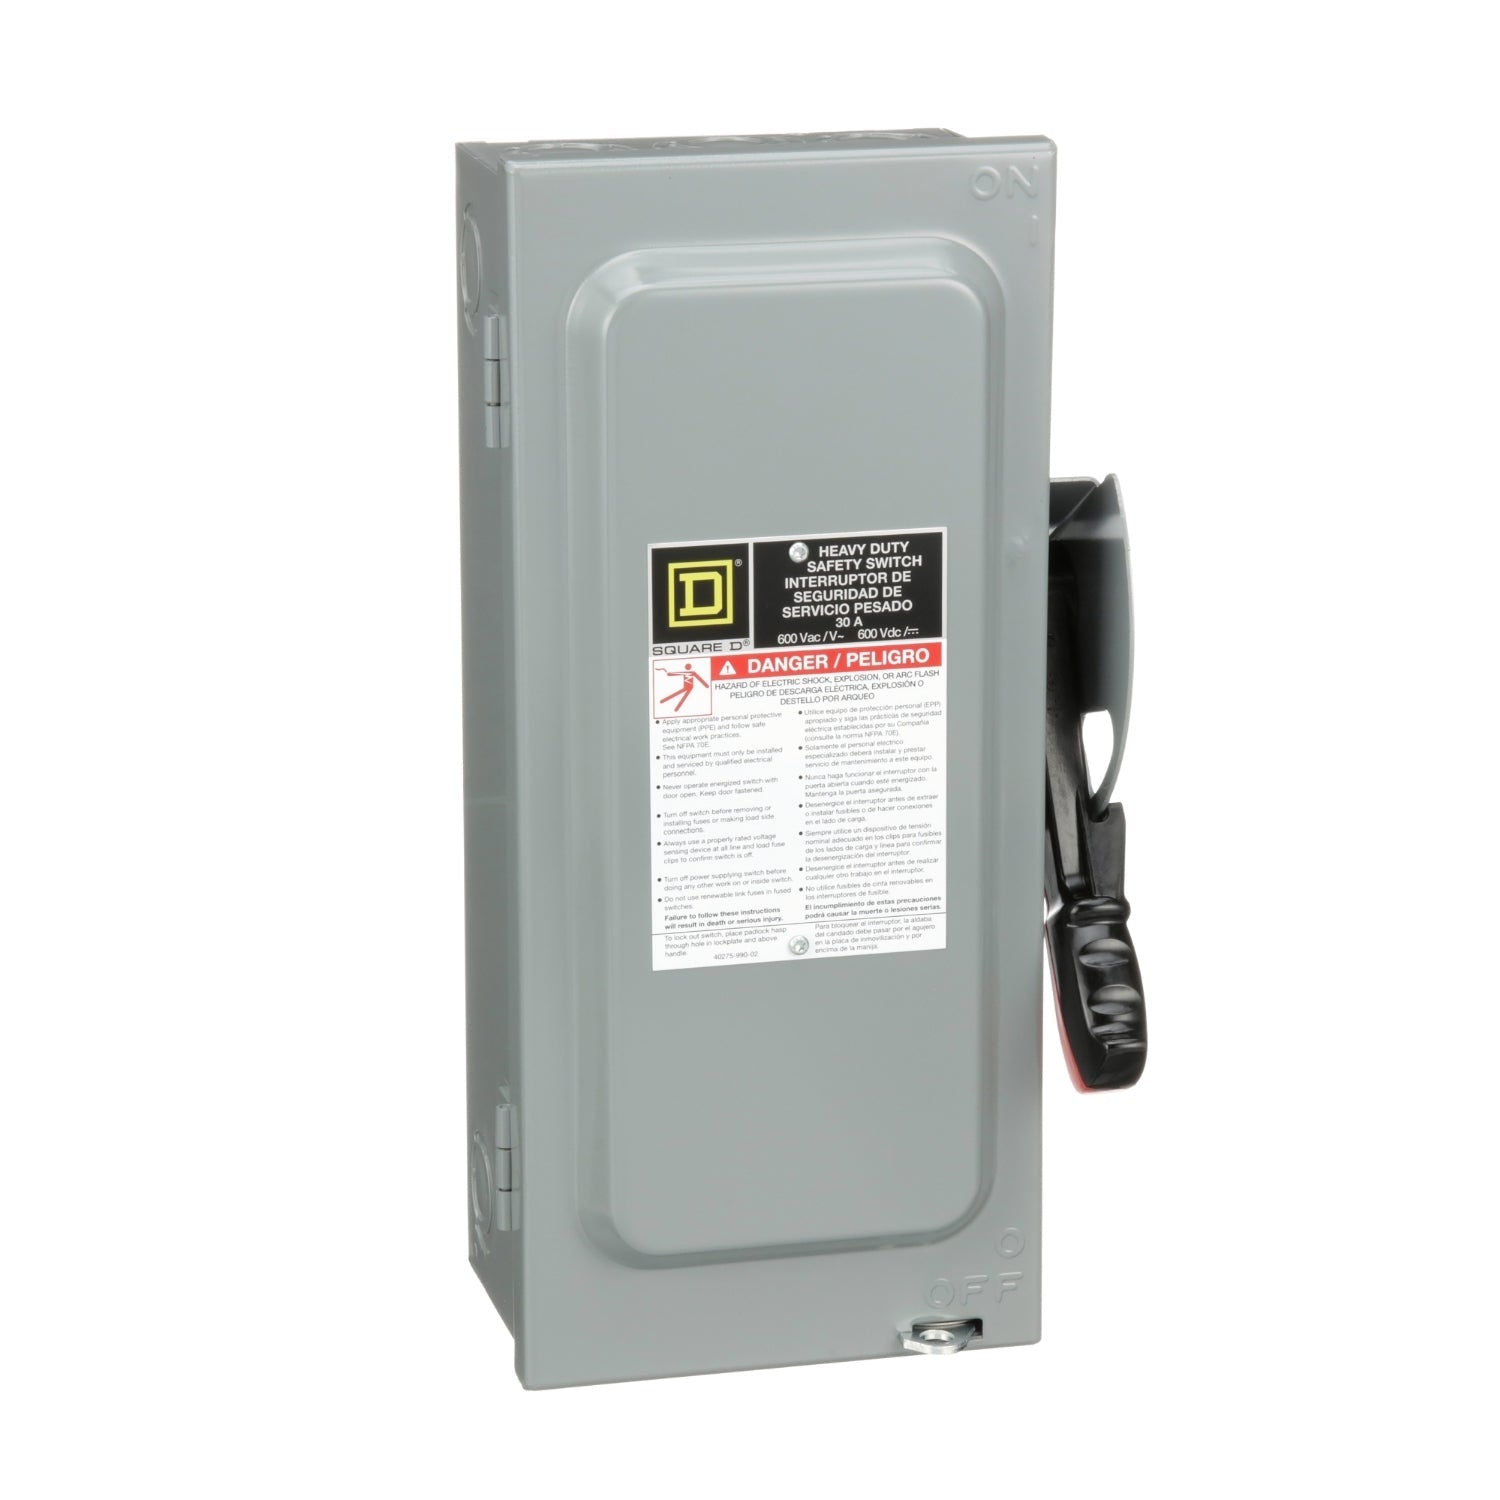 HU361 - Square D 30 Amp 3 Pole 600 Volt Disconnect and Safety Switch